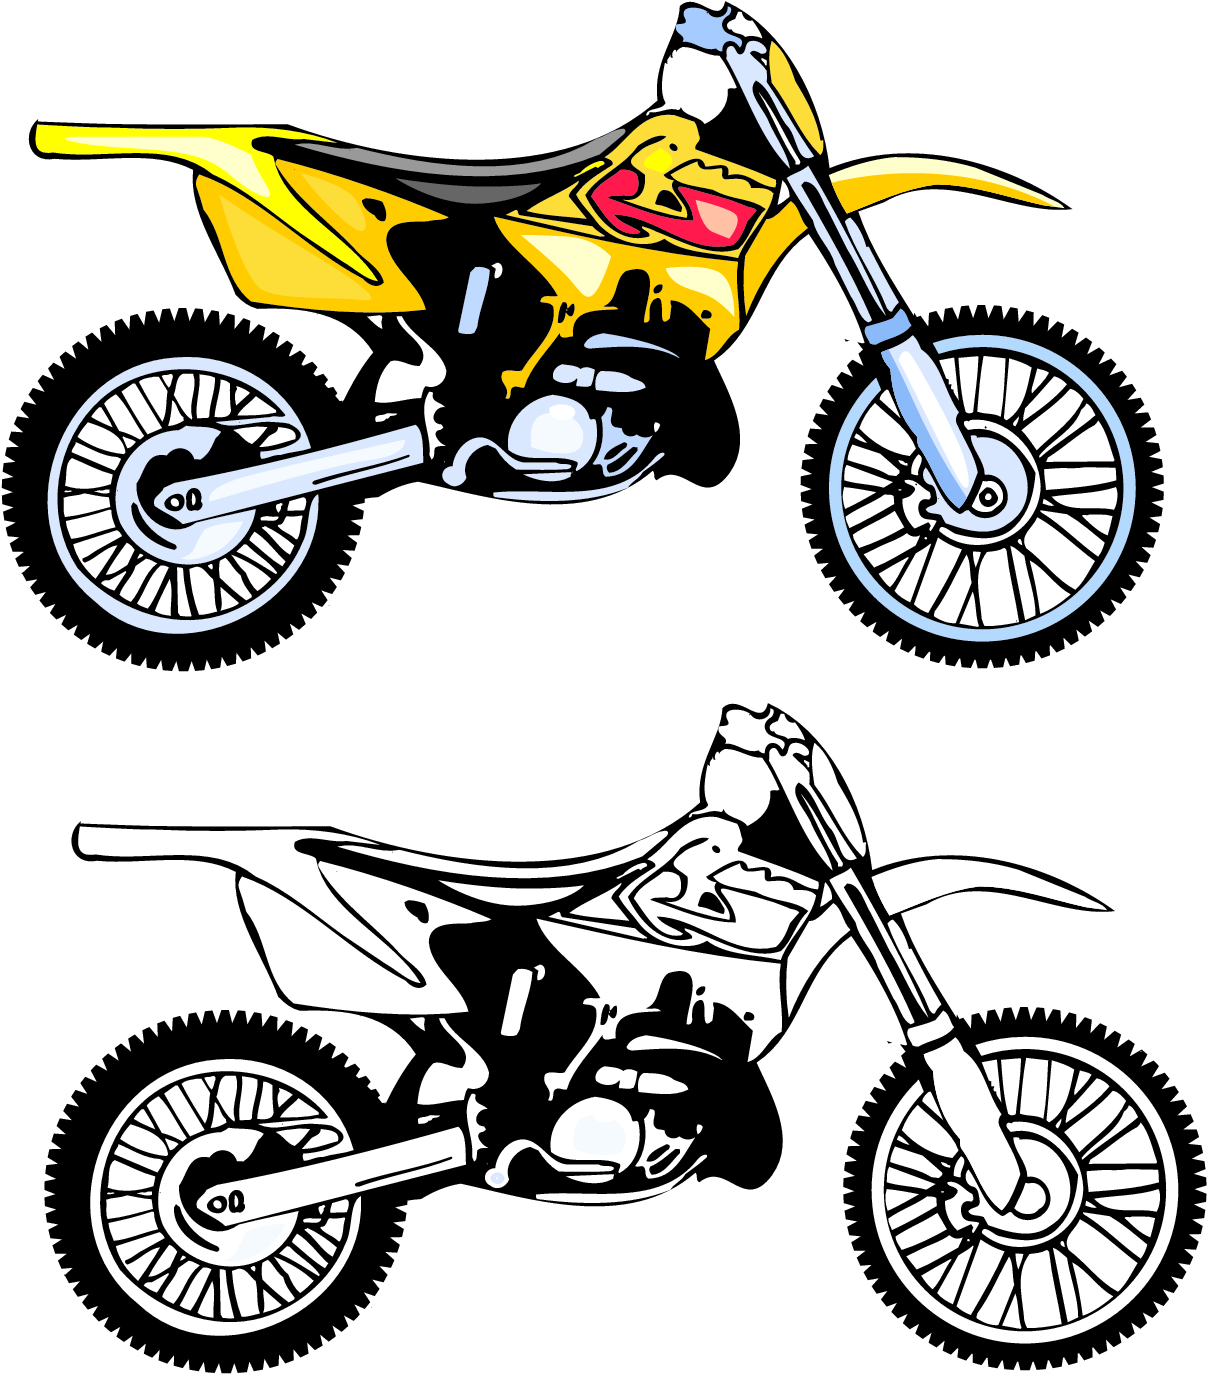 Motorcycle clip art free clipart